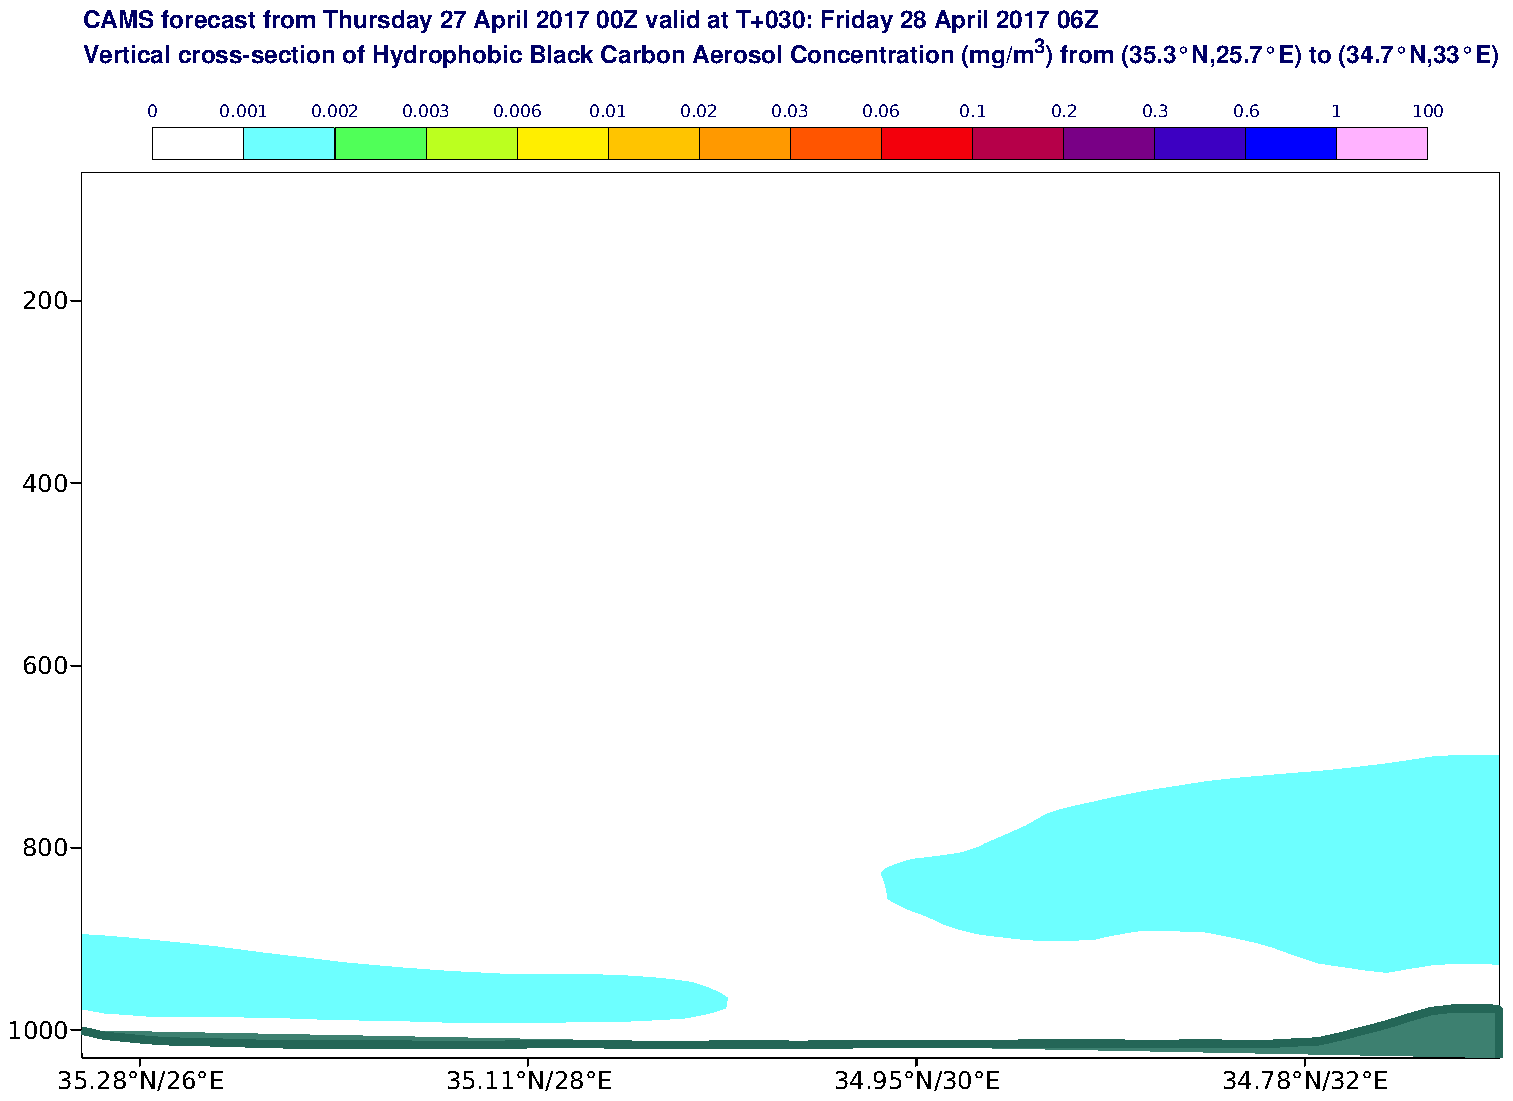 Vertical cross-section of Hydrophobic Black Carbon Aerosol Concentration (mg/m3) valid at T30 - 2017-04-28 06:00